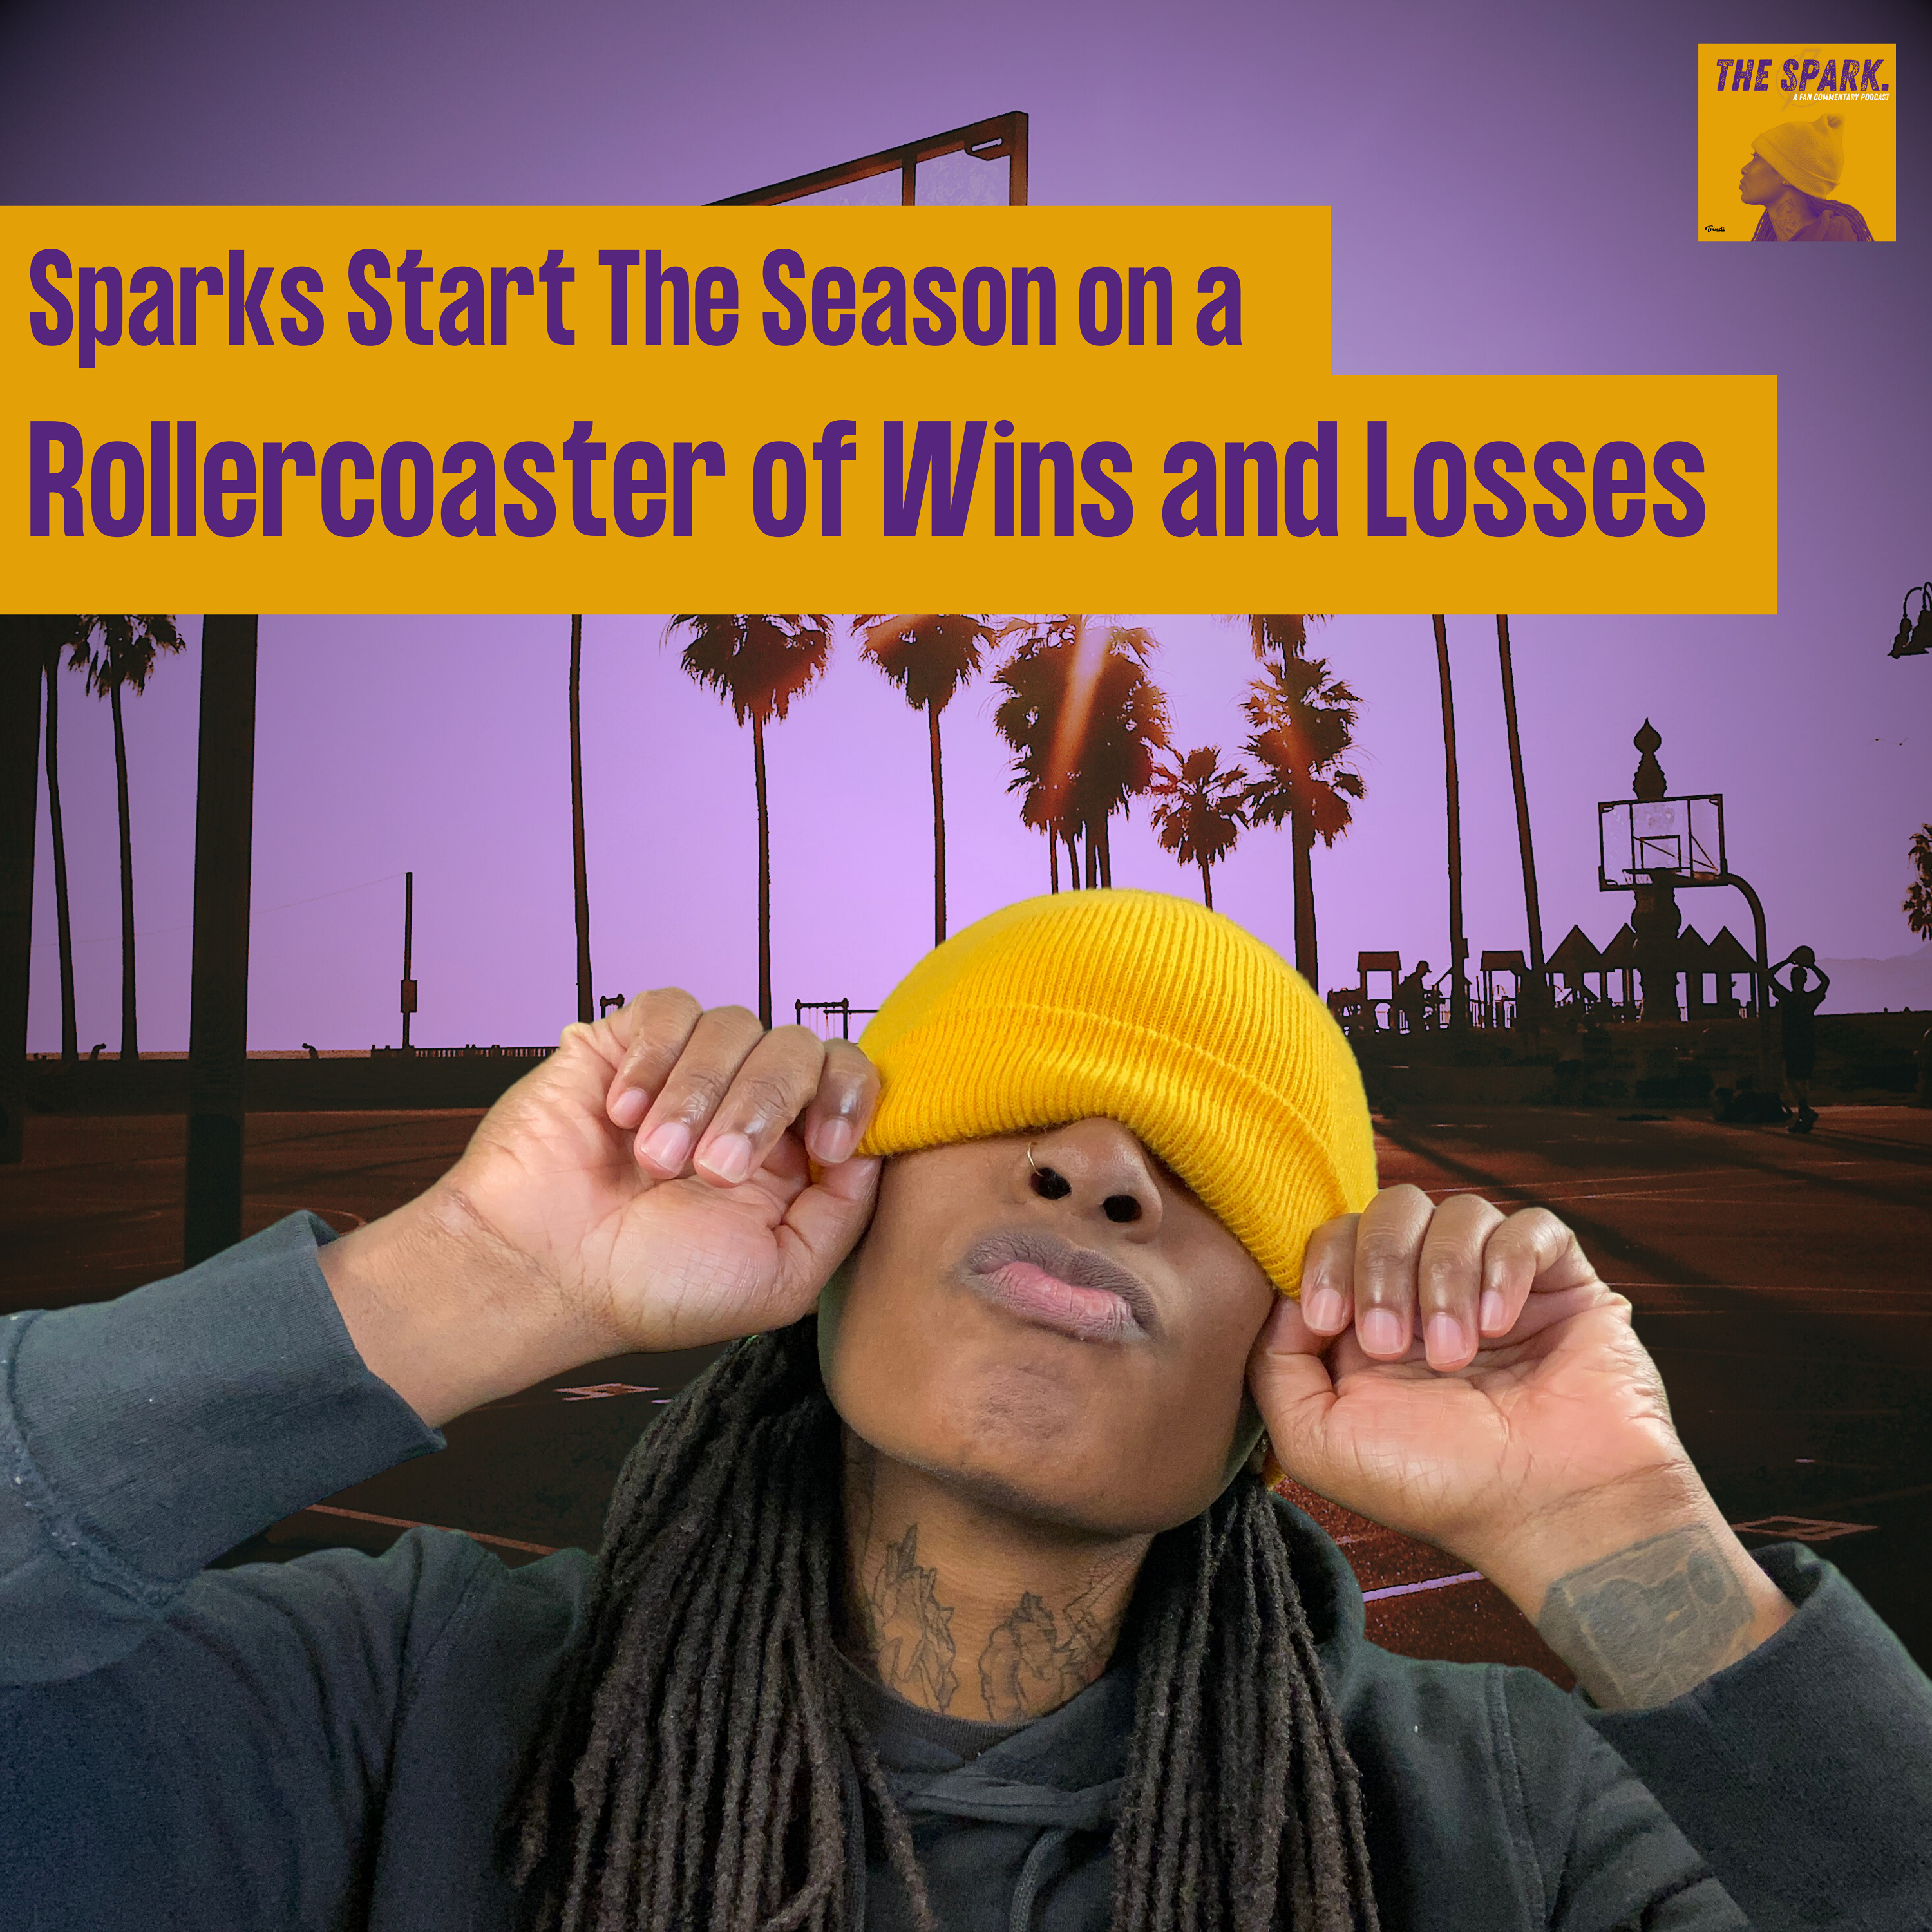 Sparks Start The Season on a Rollercoaster of Wins and Losses